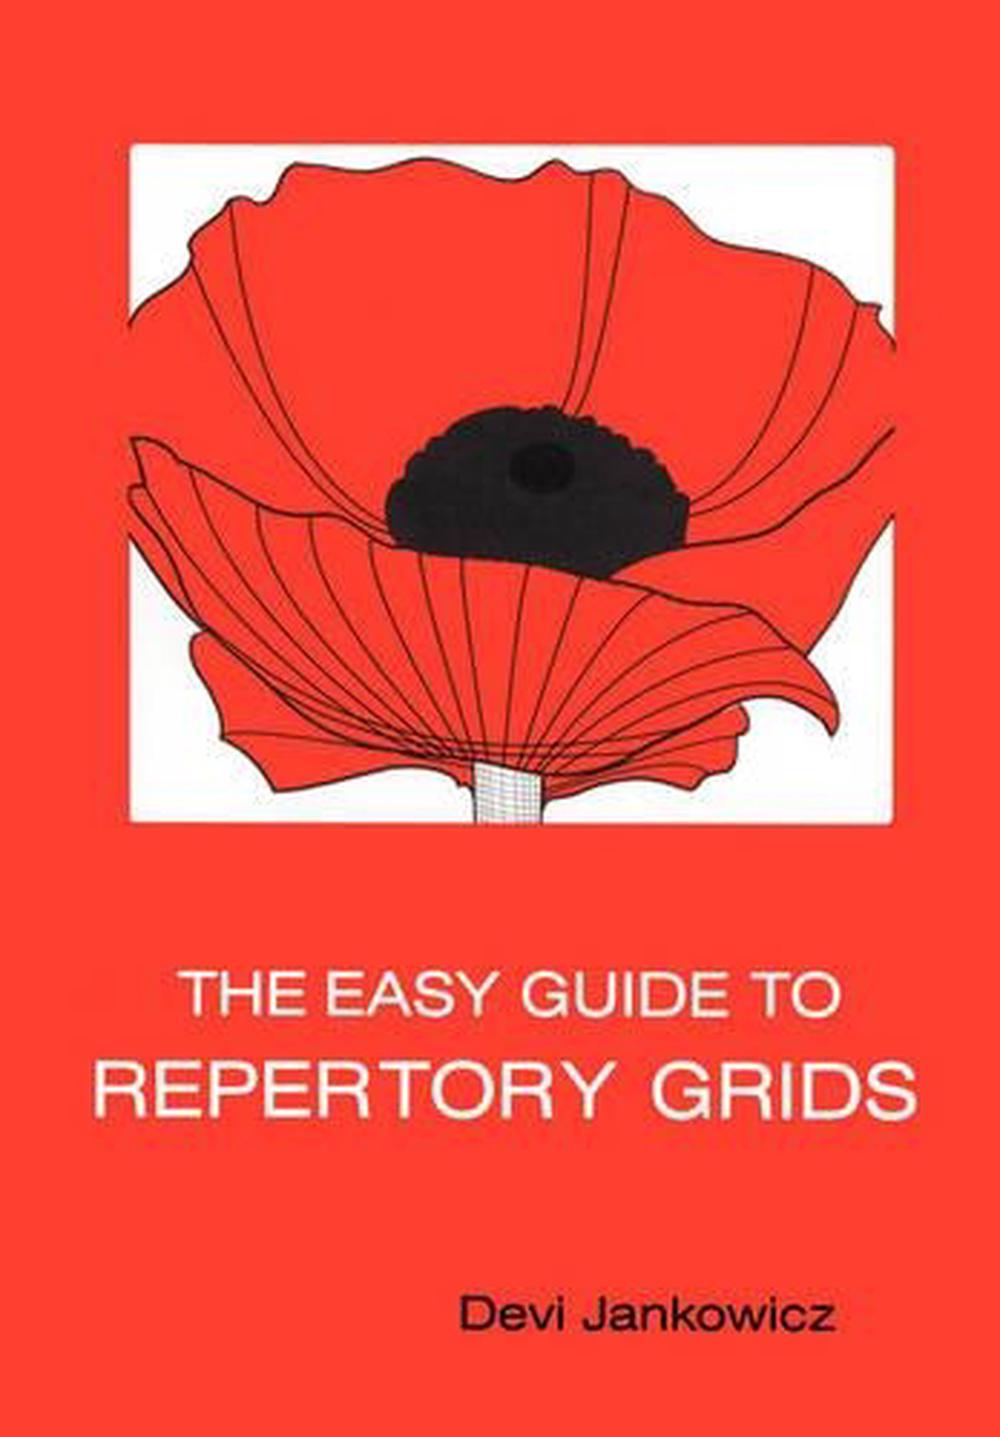 The Easy Guide to Repertory Grids by Devi Jankowicz (English) Paperback